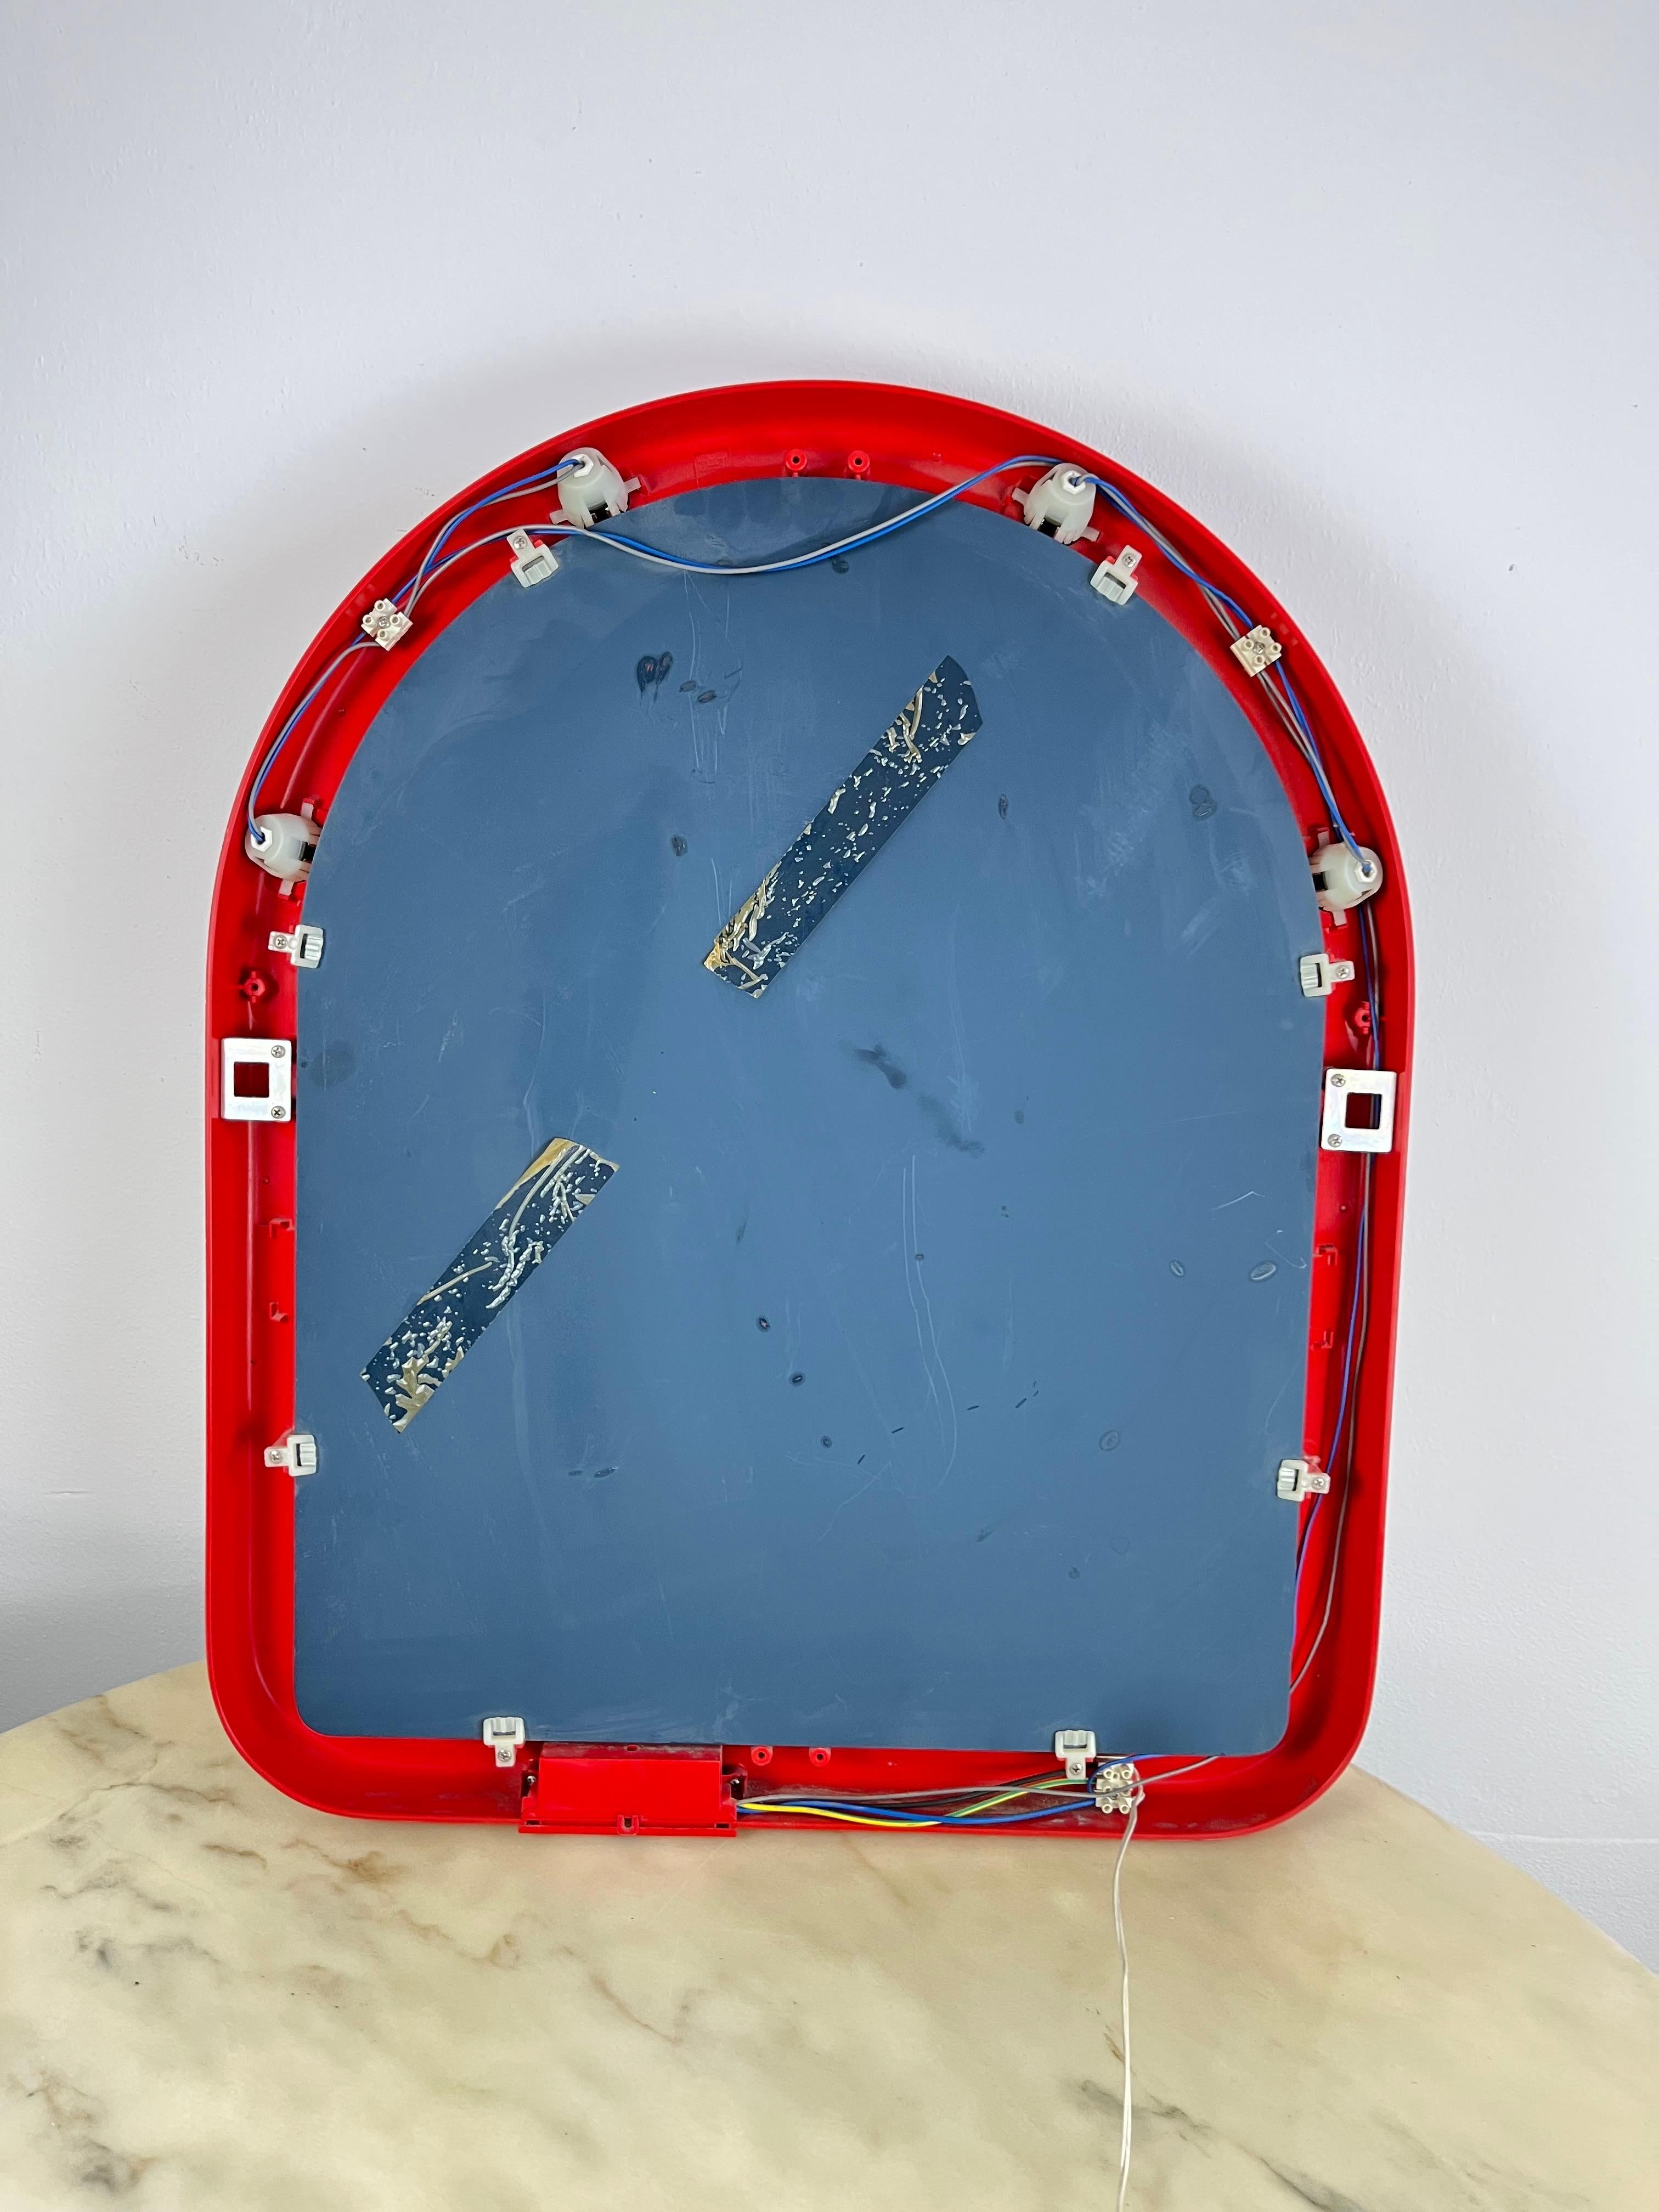 Plastic Vintage 9-piece Mirror and Bathroom Accessory Set in red plastic, Italy, 1970s For Sale